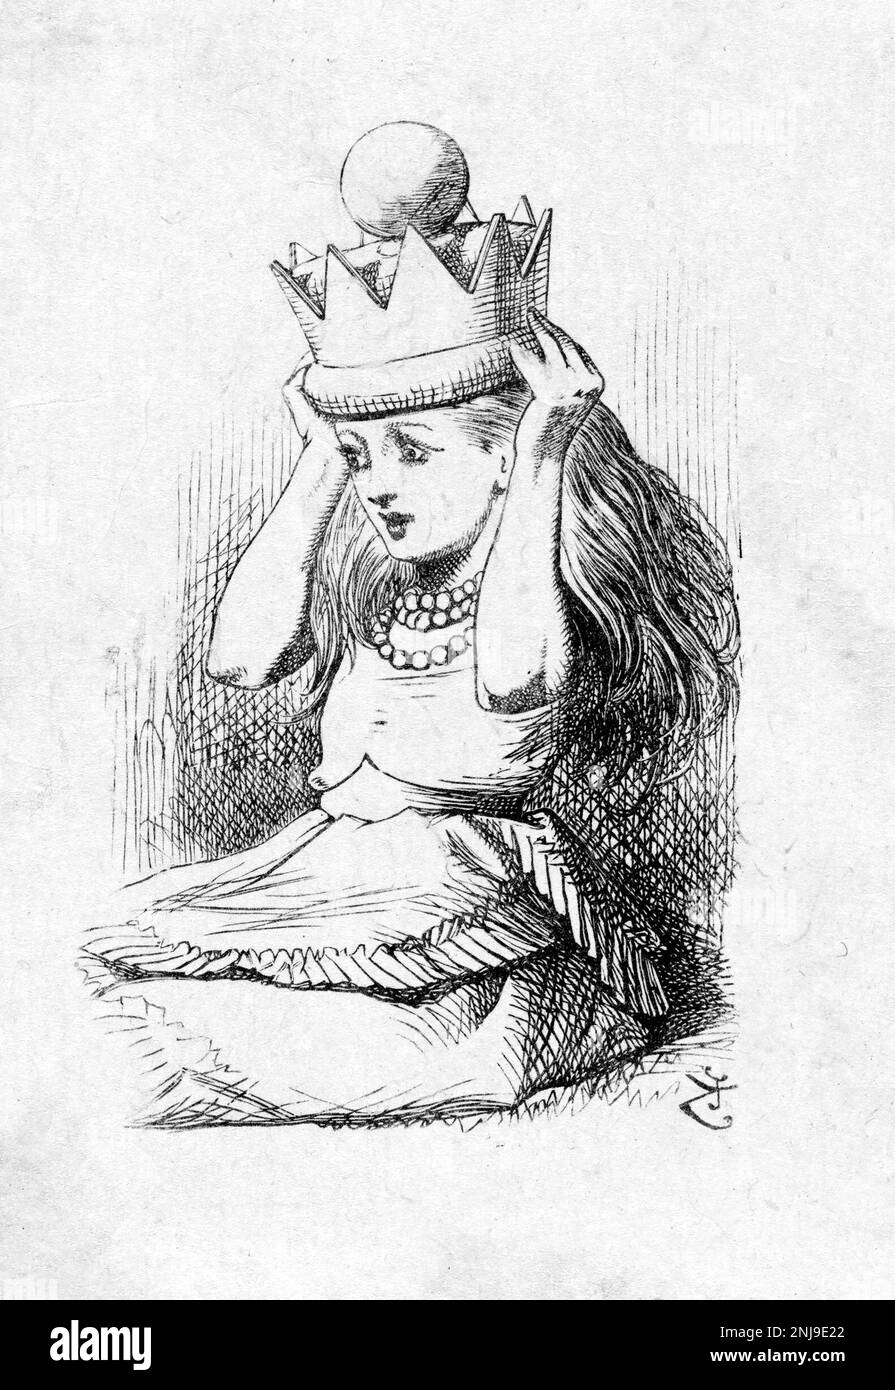 Alice with the Crown, une illustration de Sir John Tenniel pour Lewis Carroll, « Through the look-Glass, and What Alice y trouva », gravure, 1872 Banque D'Images